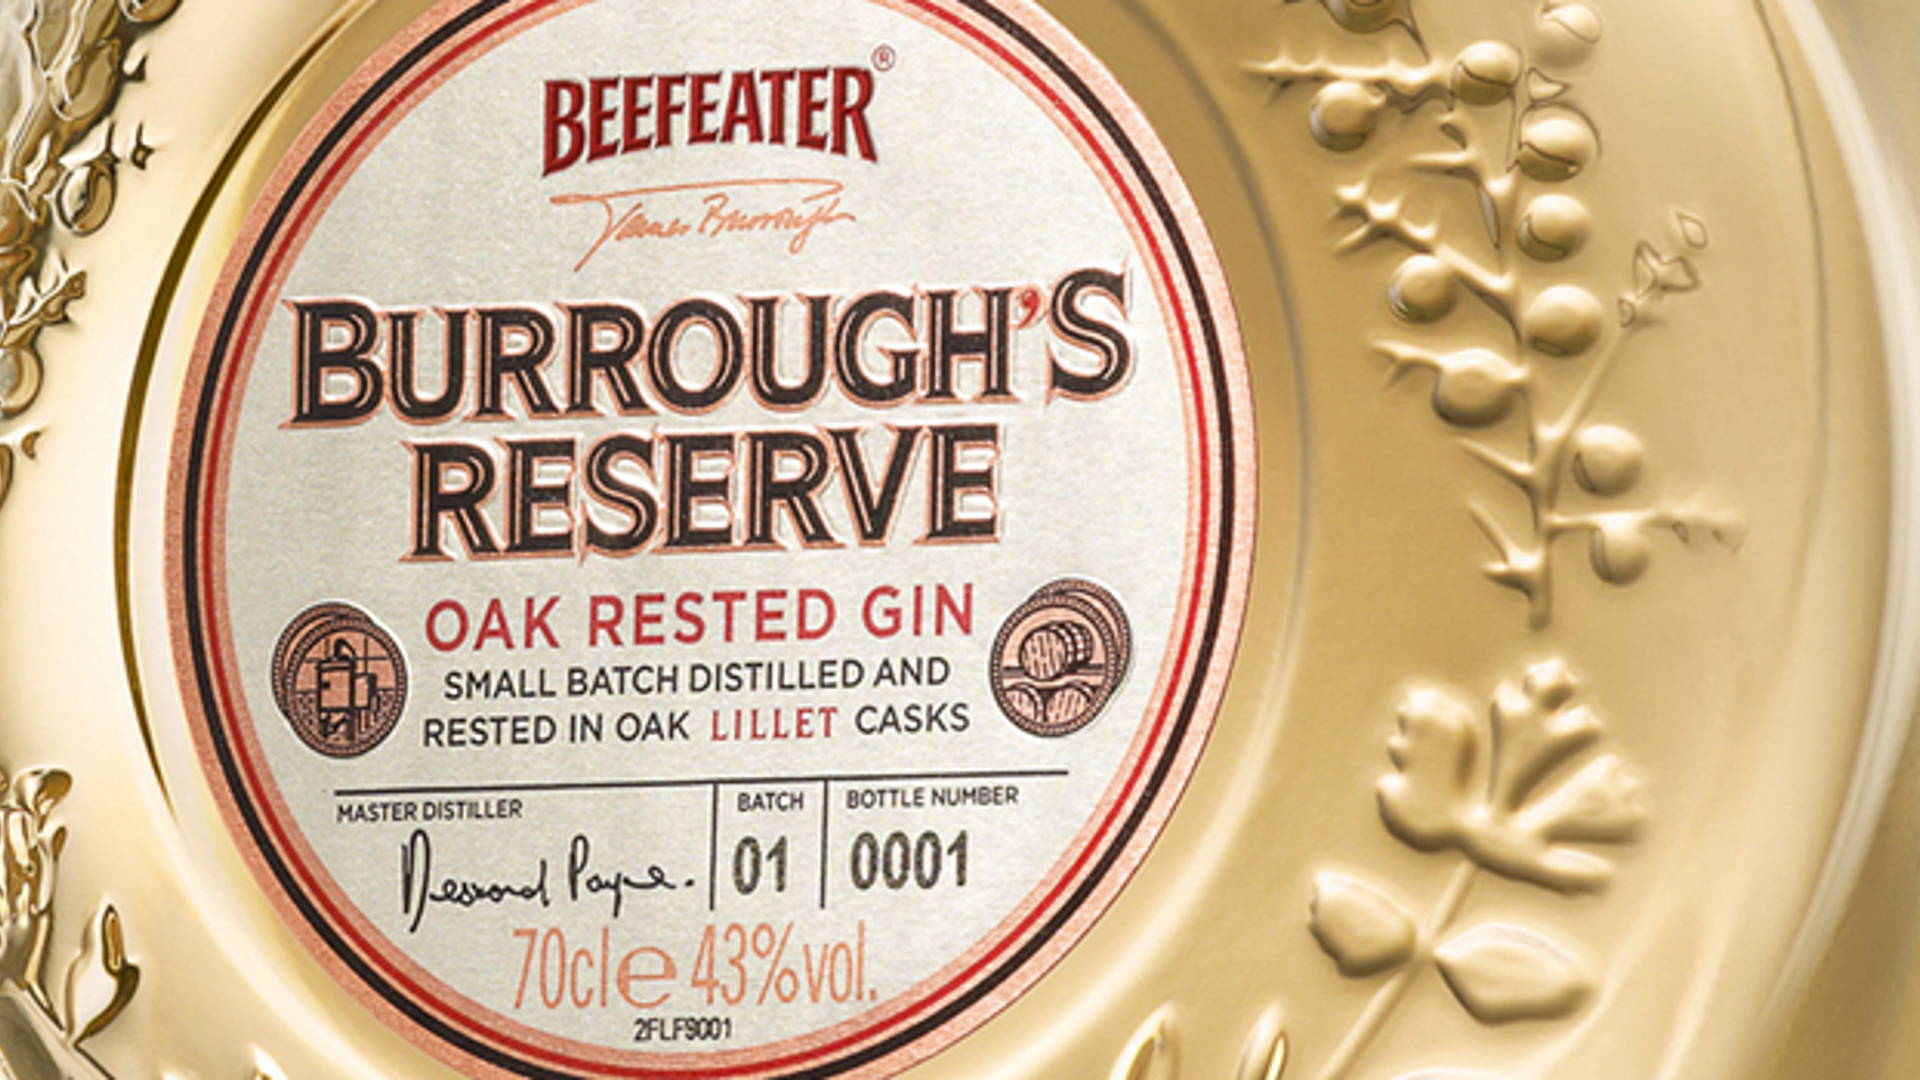 Featured image for Beefeater Burrough's Reserve